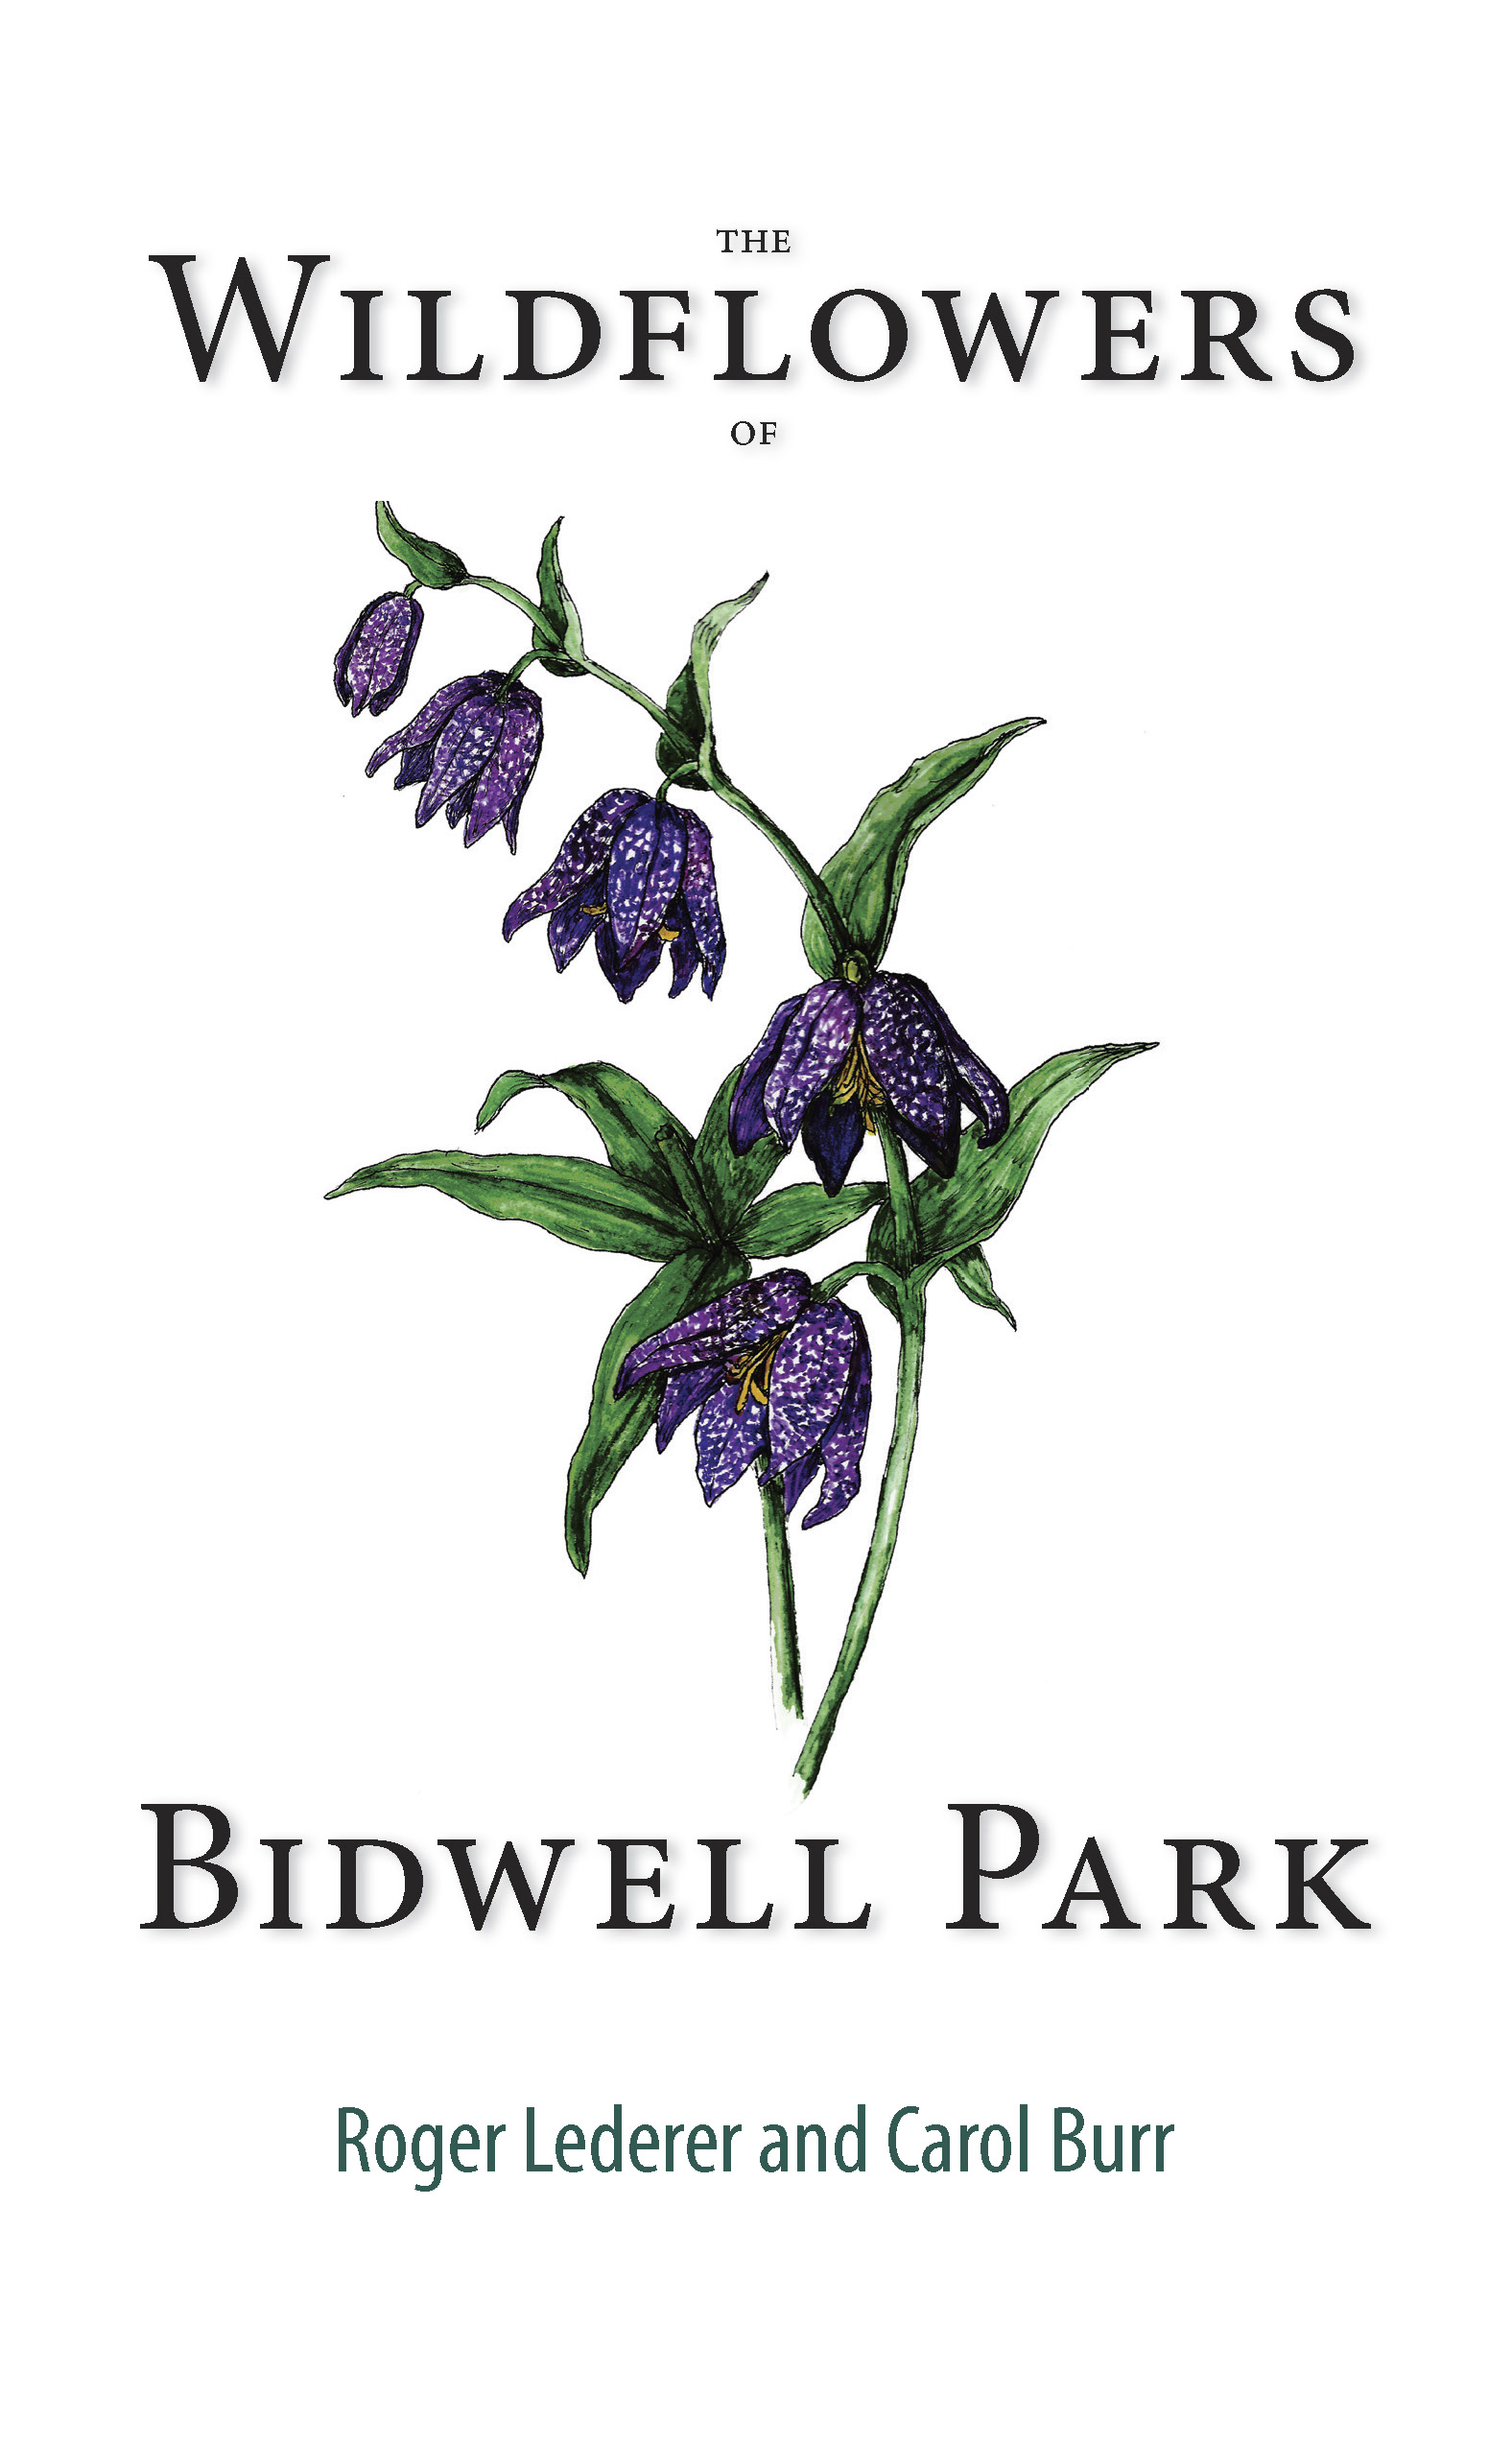 Click to order The Wildflowers in Bidwell Park